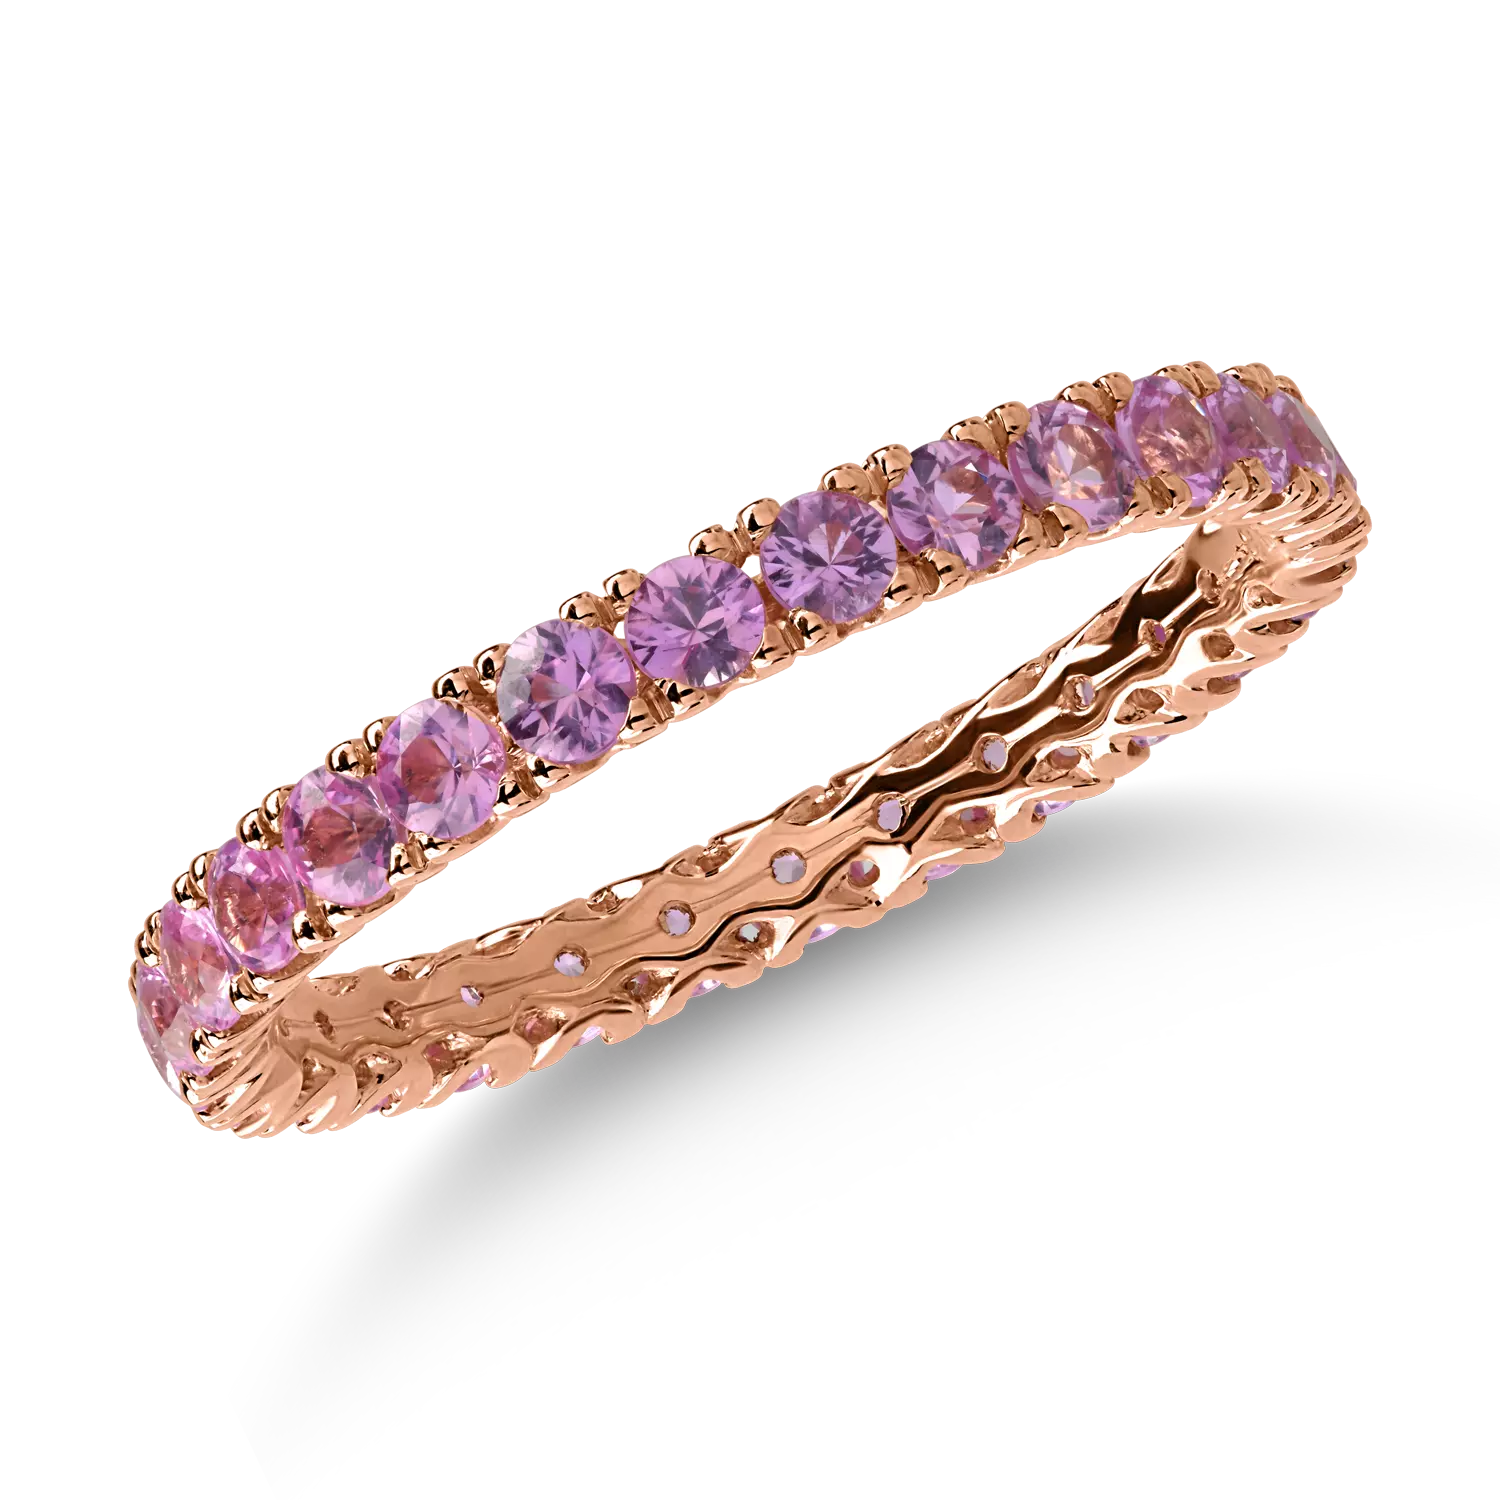 Eternity ring in rose gold with 1.3ct rubies